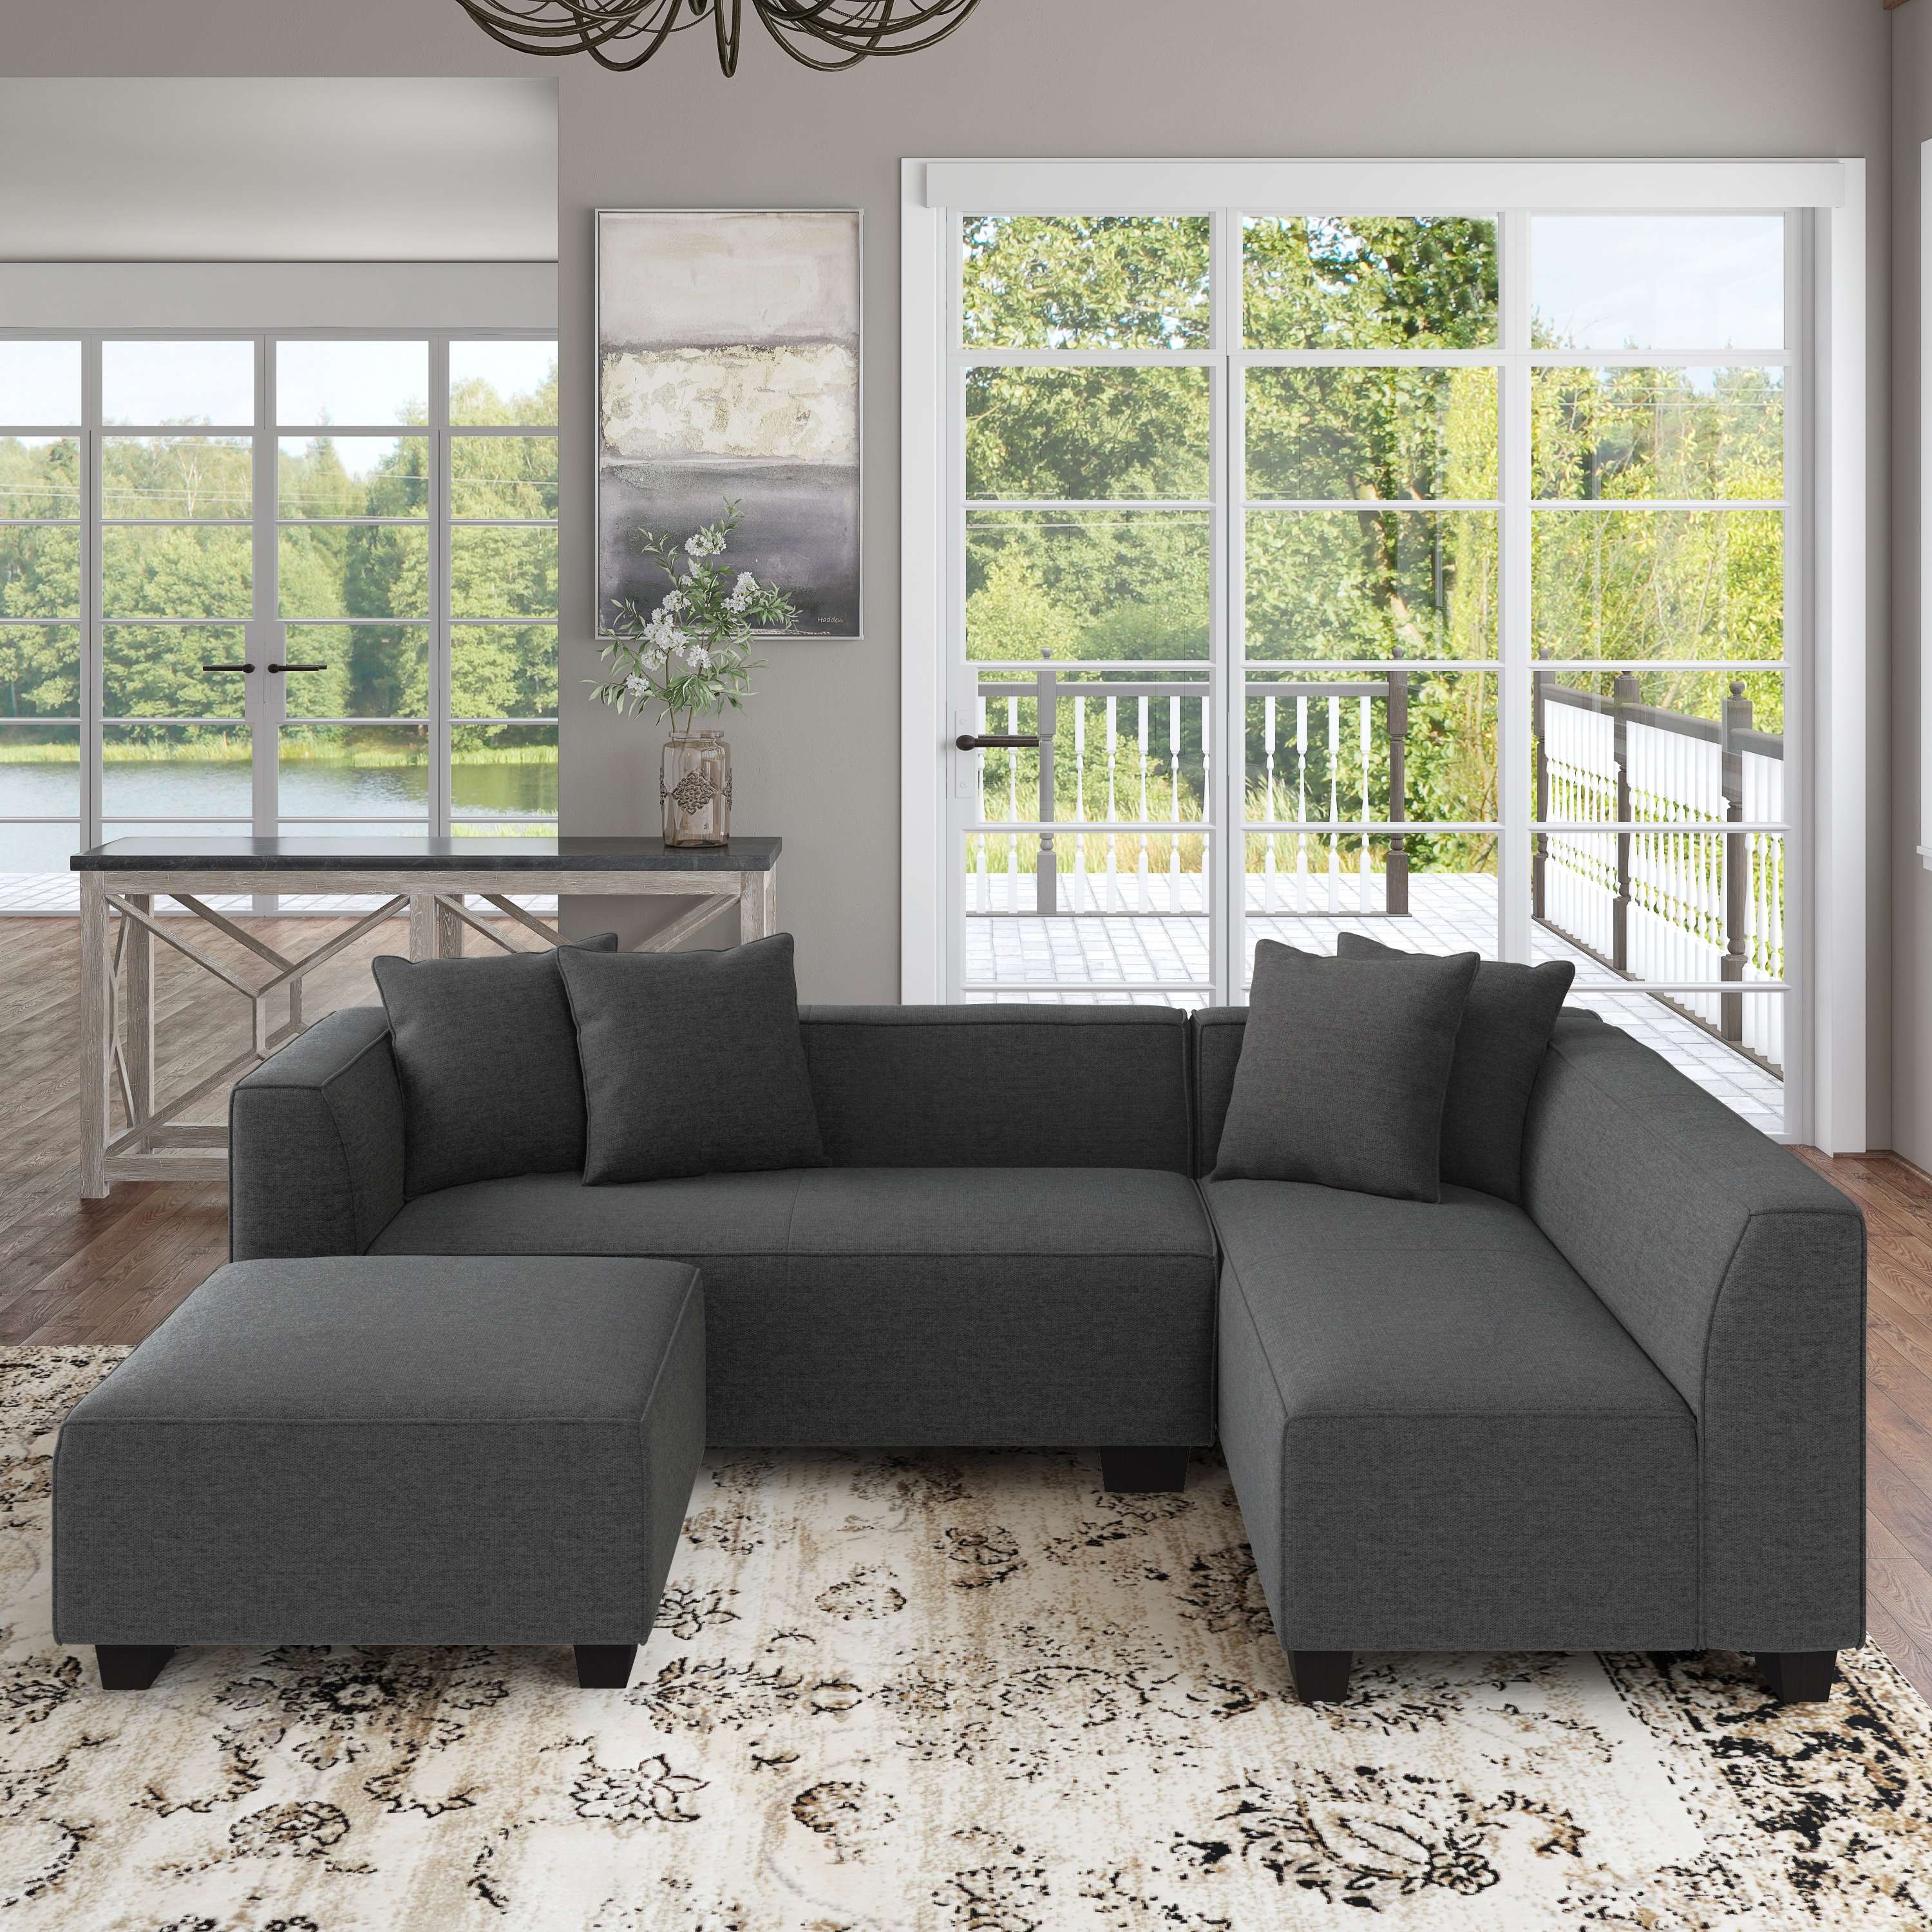 Easton 97.5″ Wide Right Hand Facing Corner Sectional with Ottoman